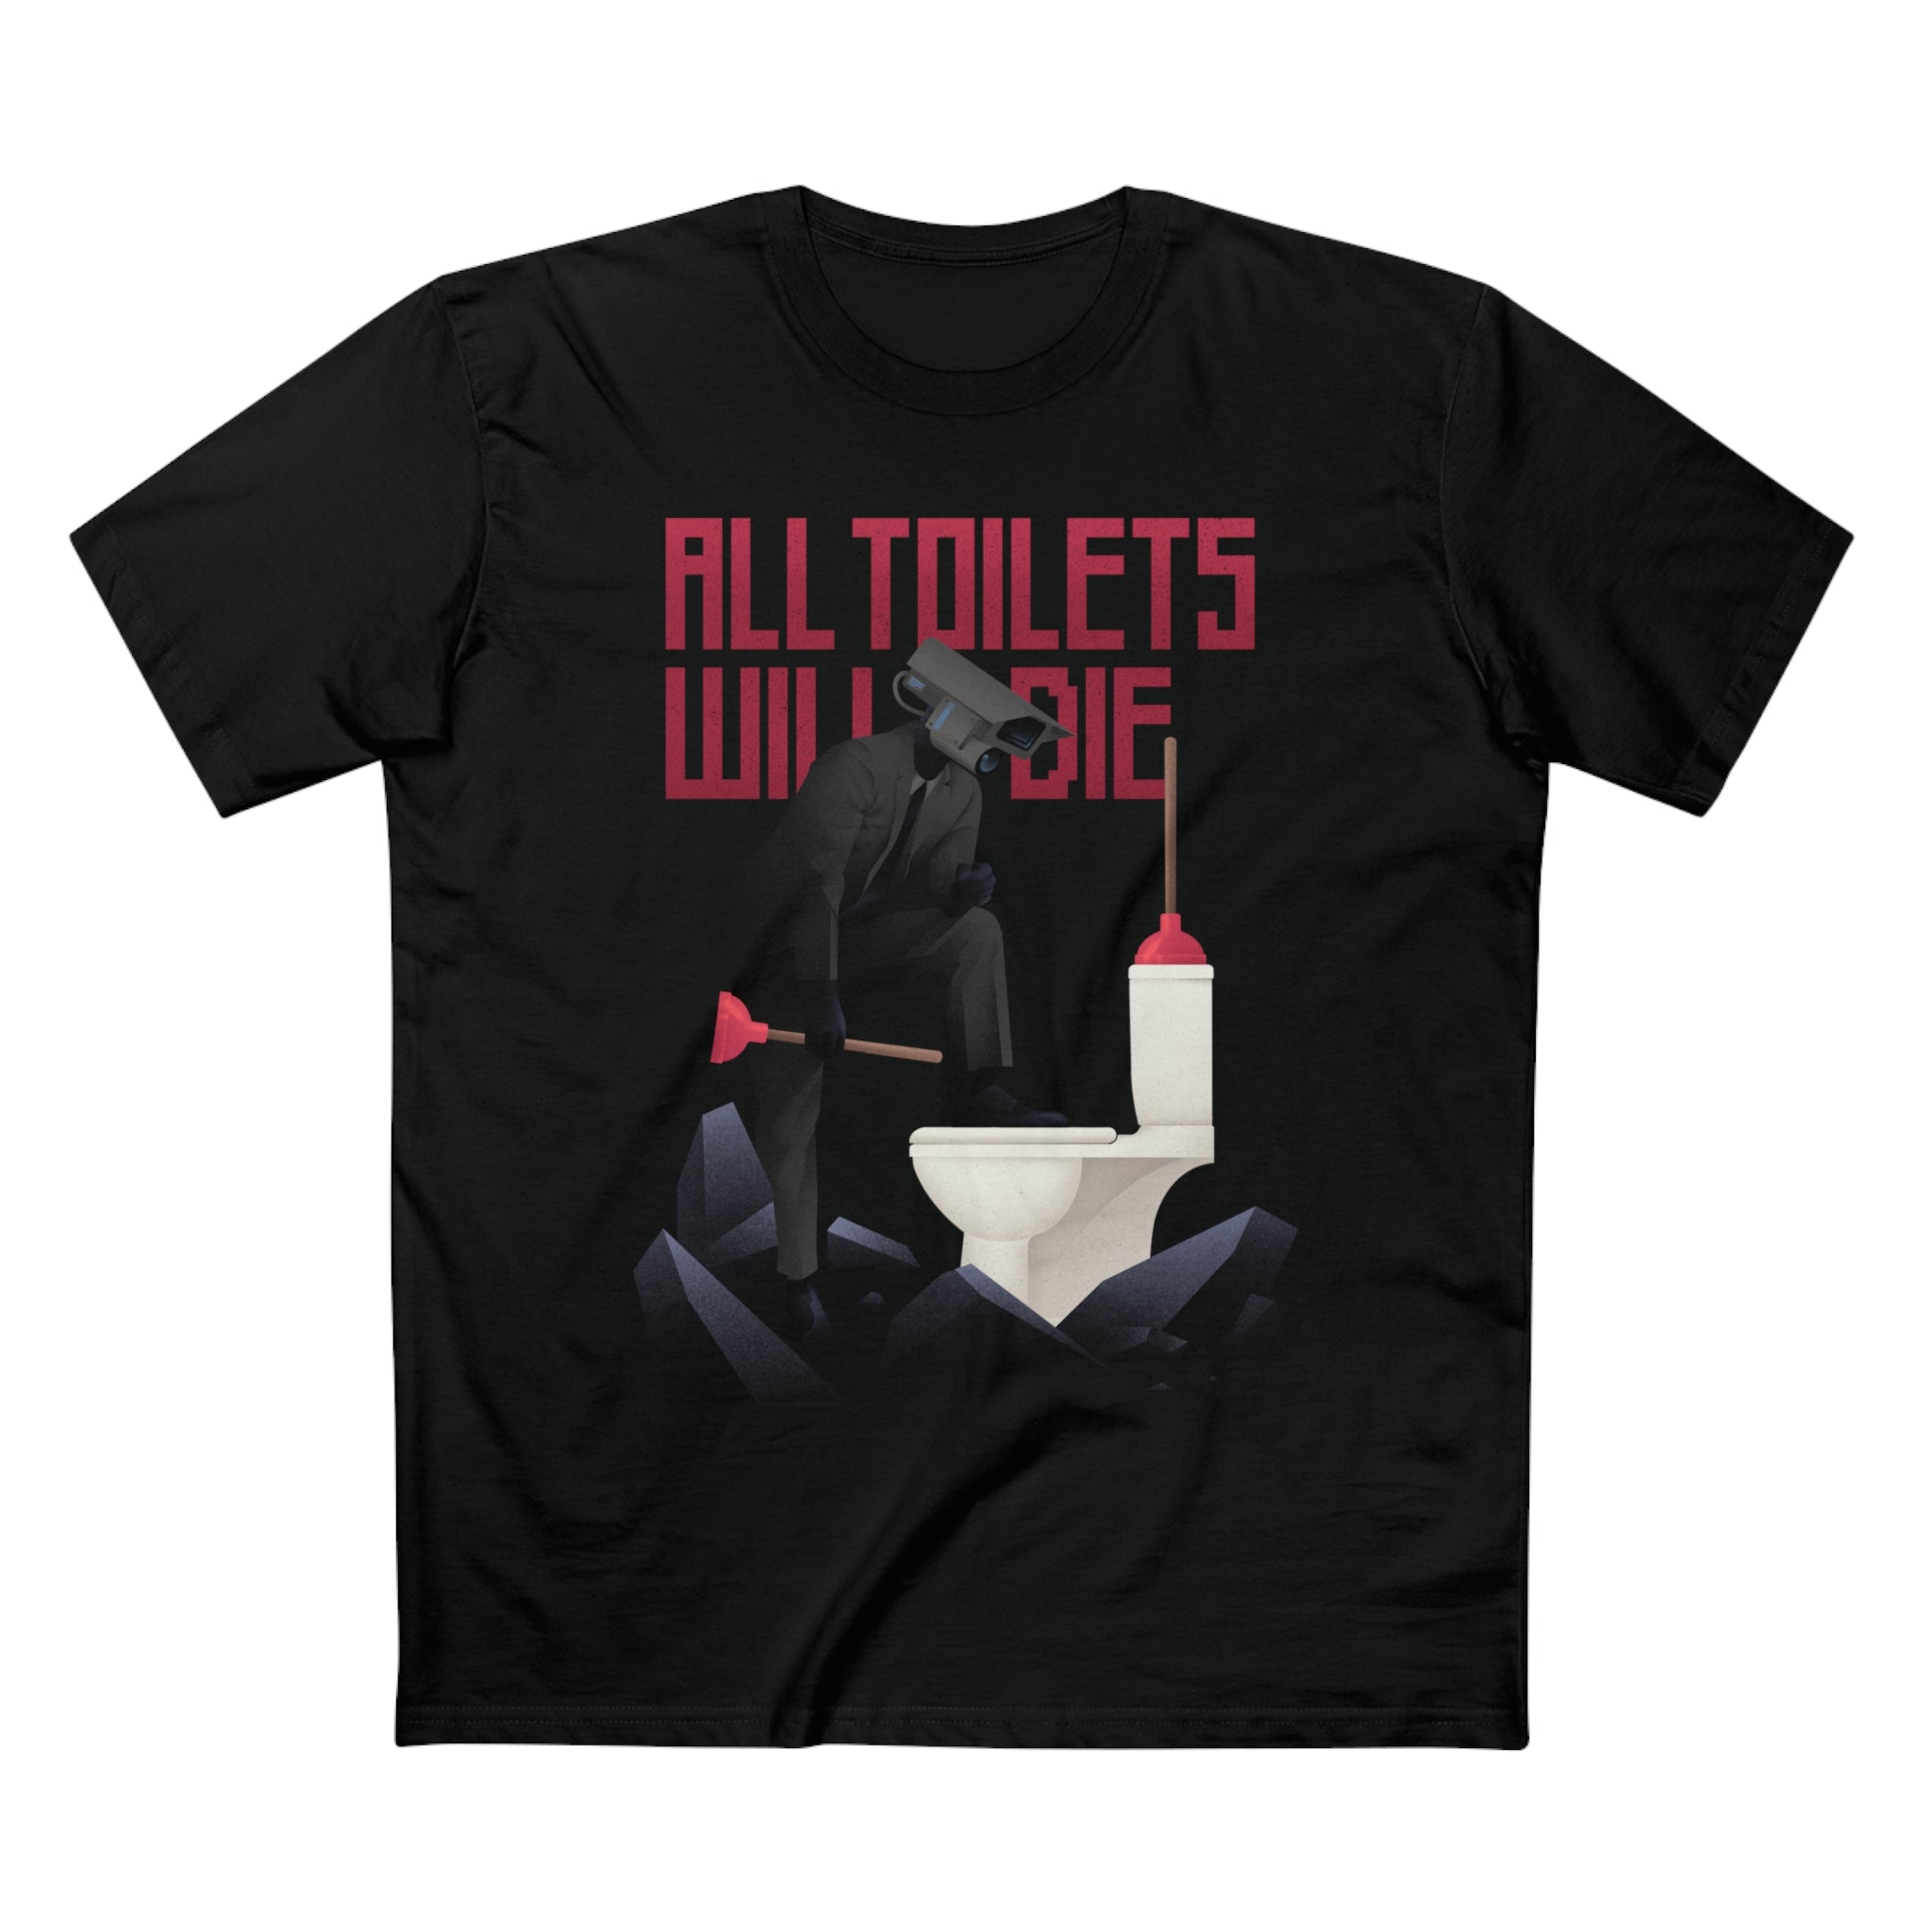 All Toilets Will Die Adult Tee, black tee featuring a graphic of Plungerman stepping on a skibidi toilet, with plunger in hand, and text ALL TOILETS WILL DIE behind him